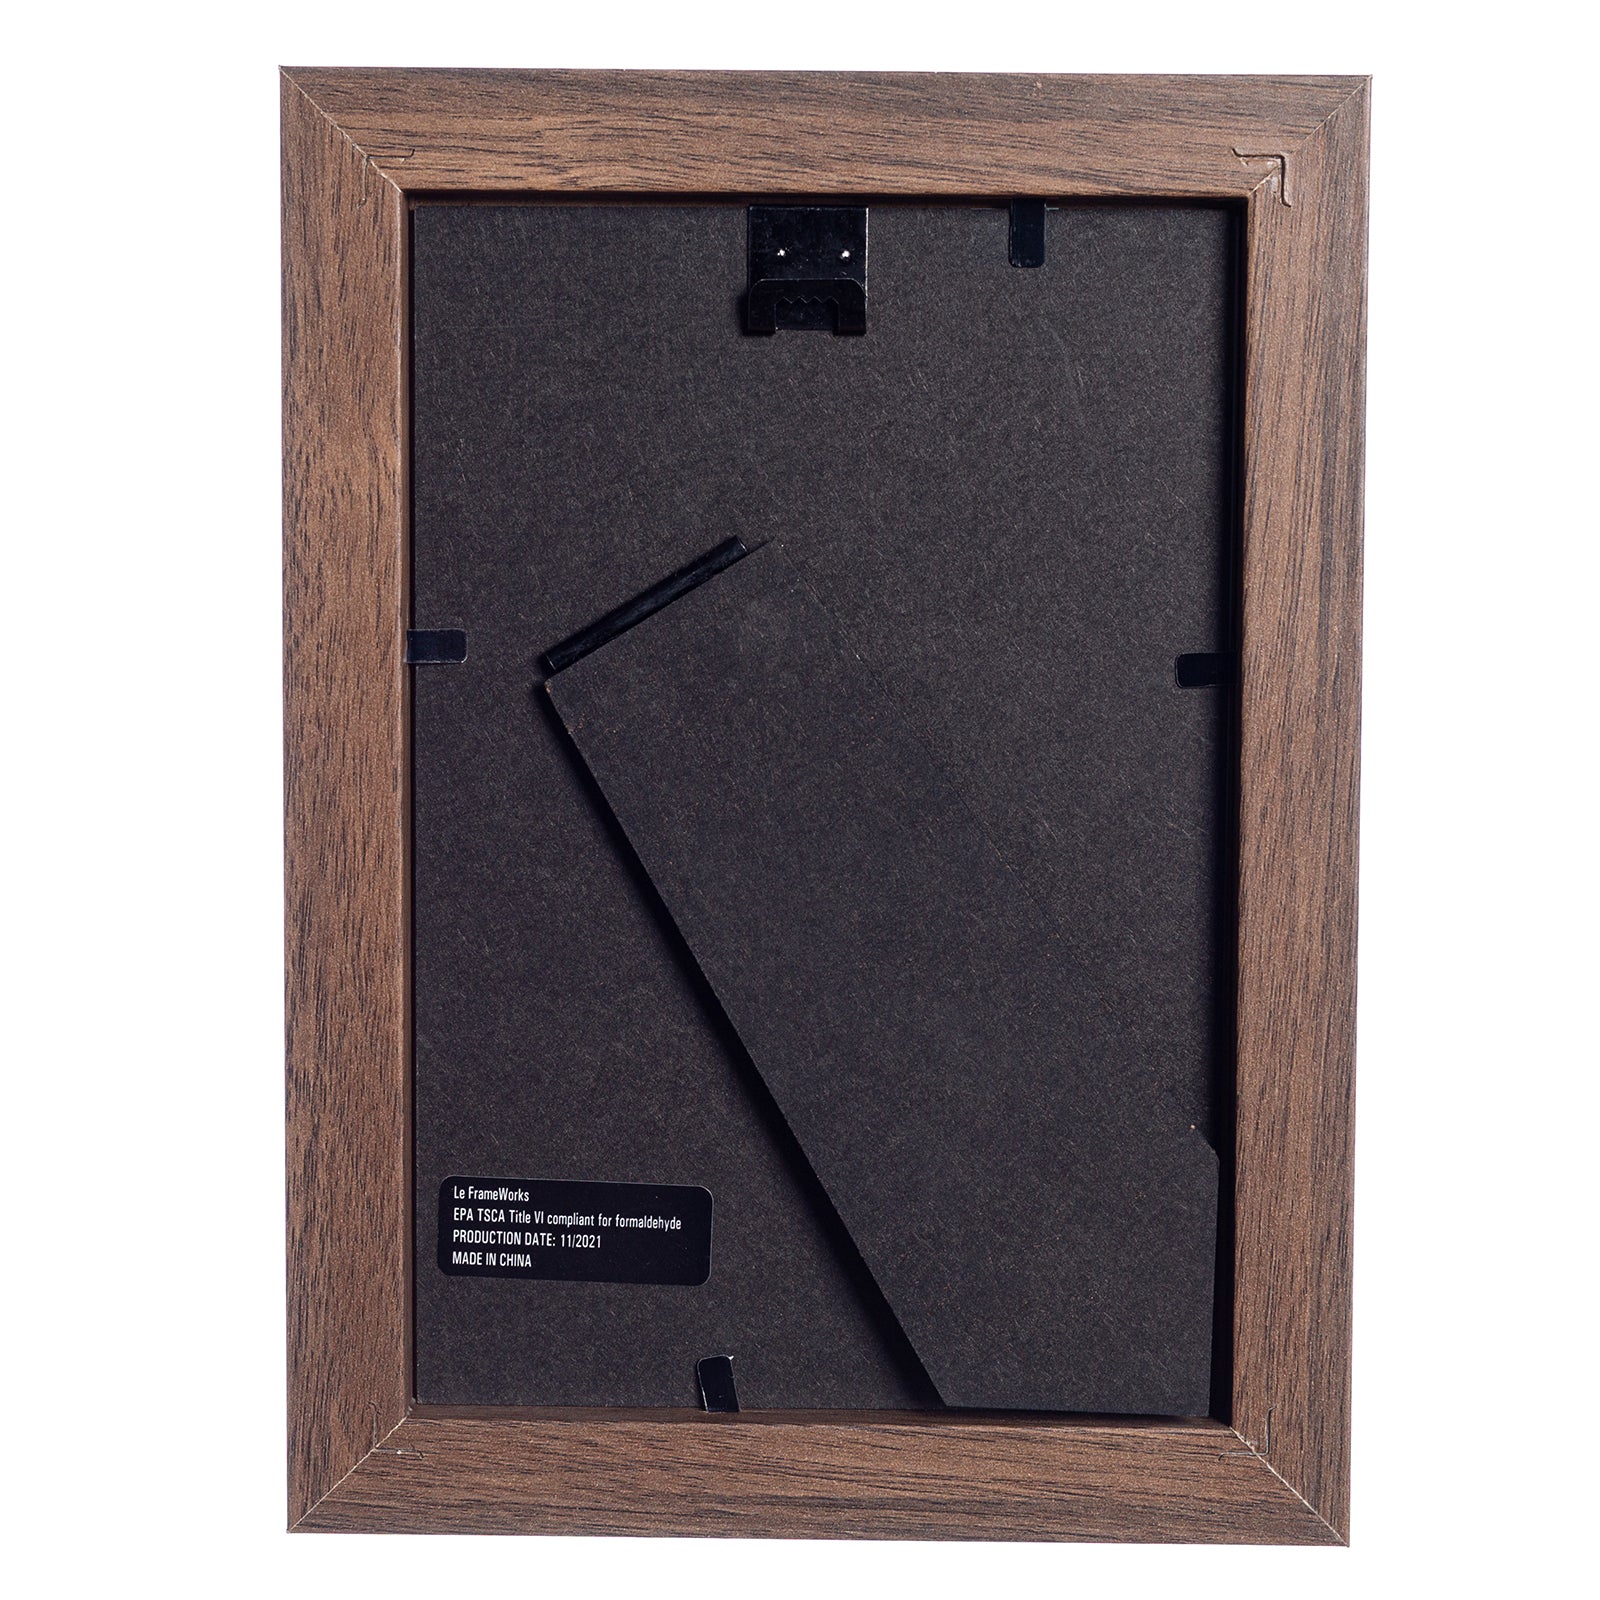 4" x 6” Classic Dark Oak Wood Picture Frame with Tempered Glass